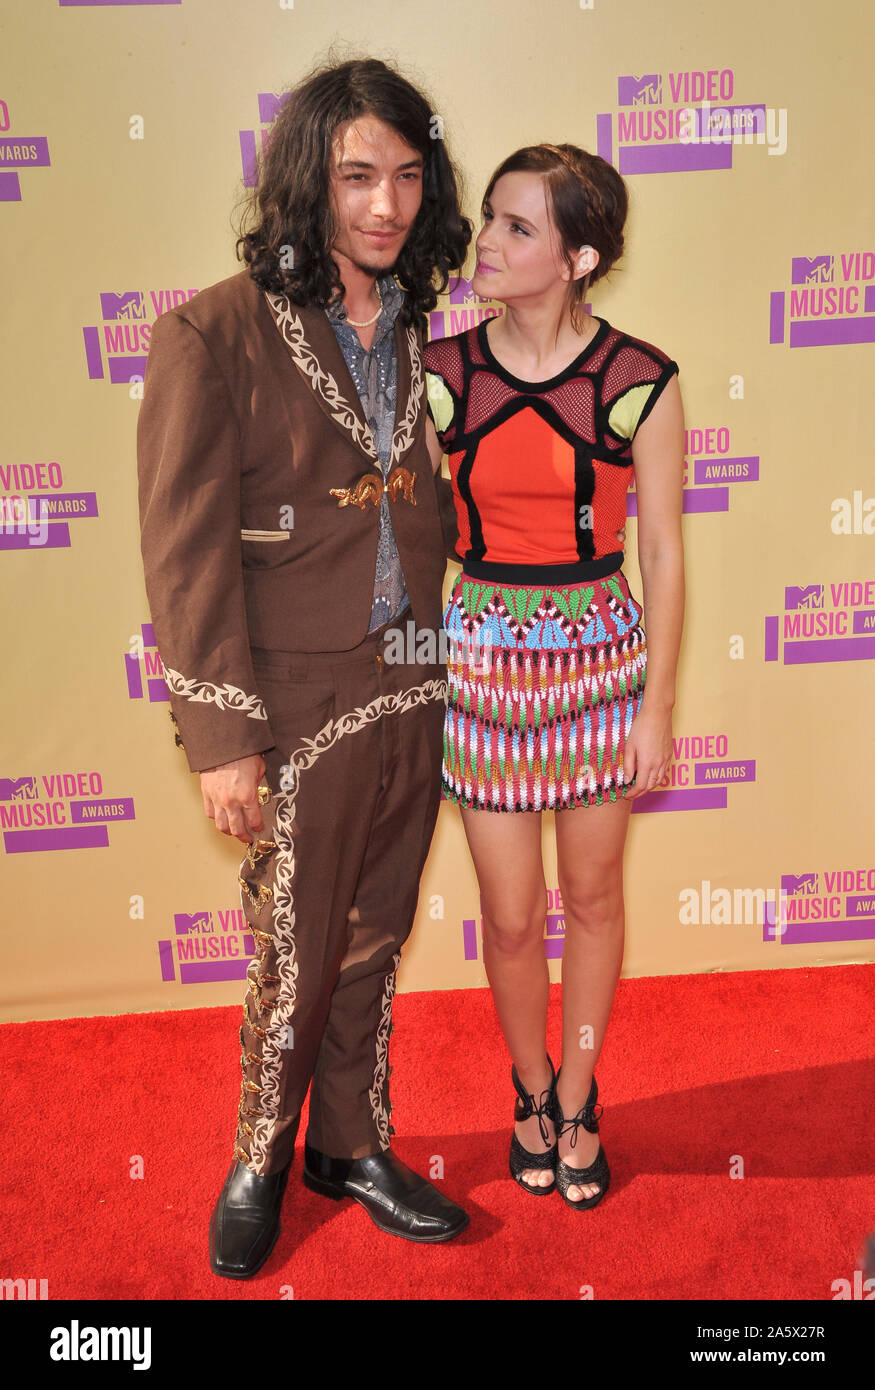 LOS ANGELES, CA. September 07, 2012: Emma Watson & Ezra Miller at the 2012 MTV Video Music Awards at Staples Center, Los Angeles. © 2012 Paul Smith / Featureflash Stock Photo